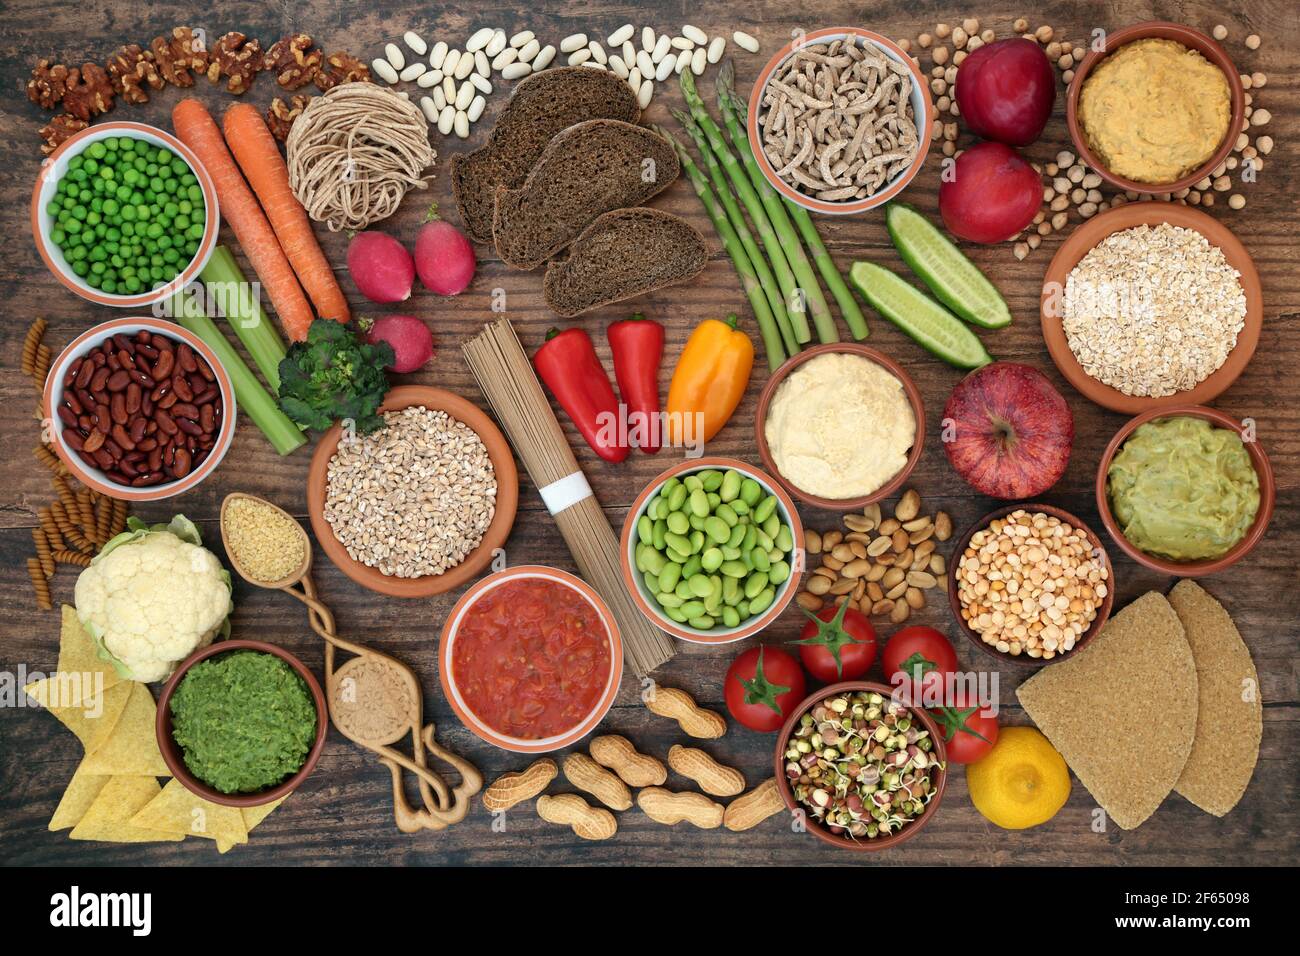 Low G1 healthy diet food for diabetics with all foods below 55 on the GI index. High in antioxidants, vitamins, anthocyanins, protein and  fibre. Stock Photo